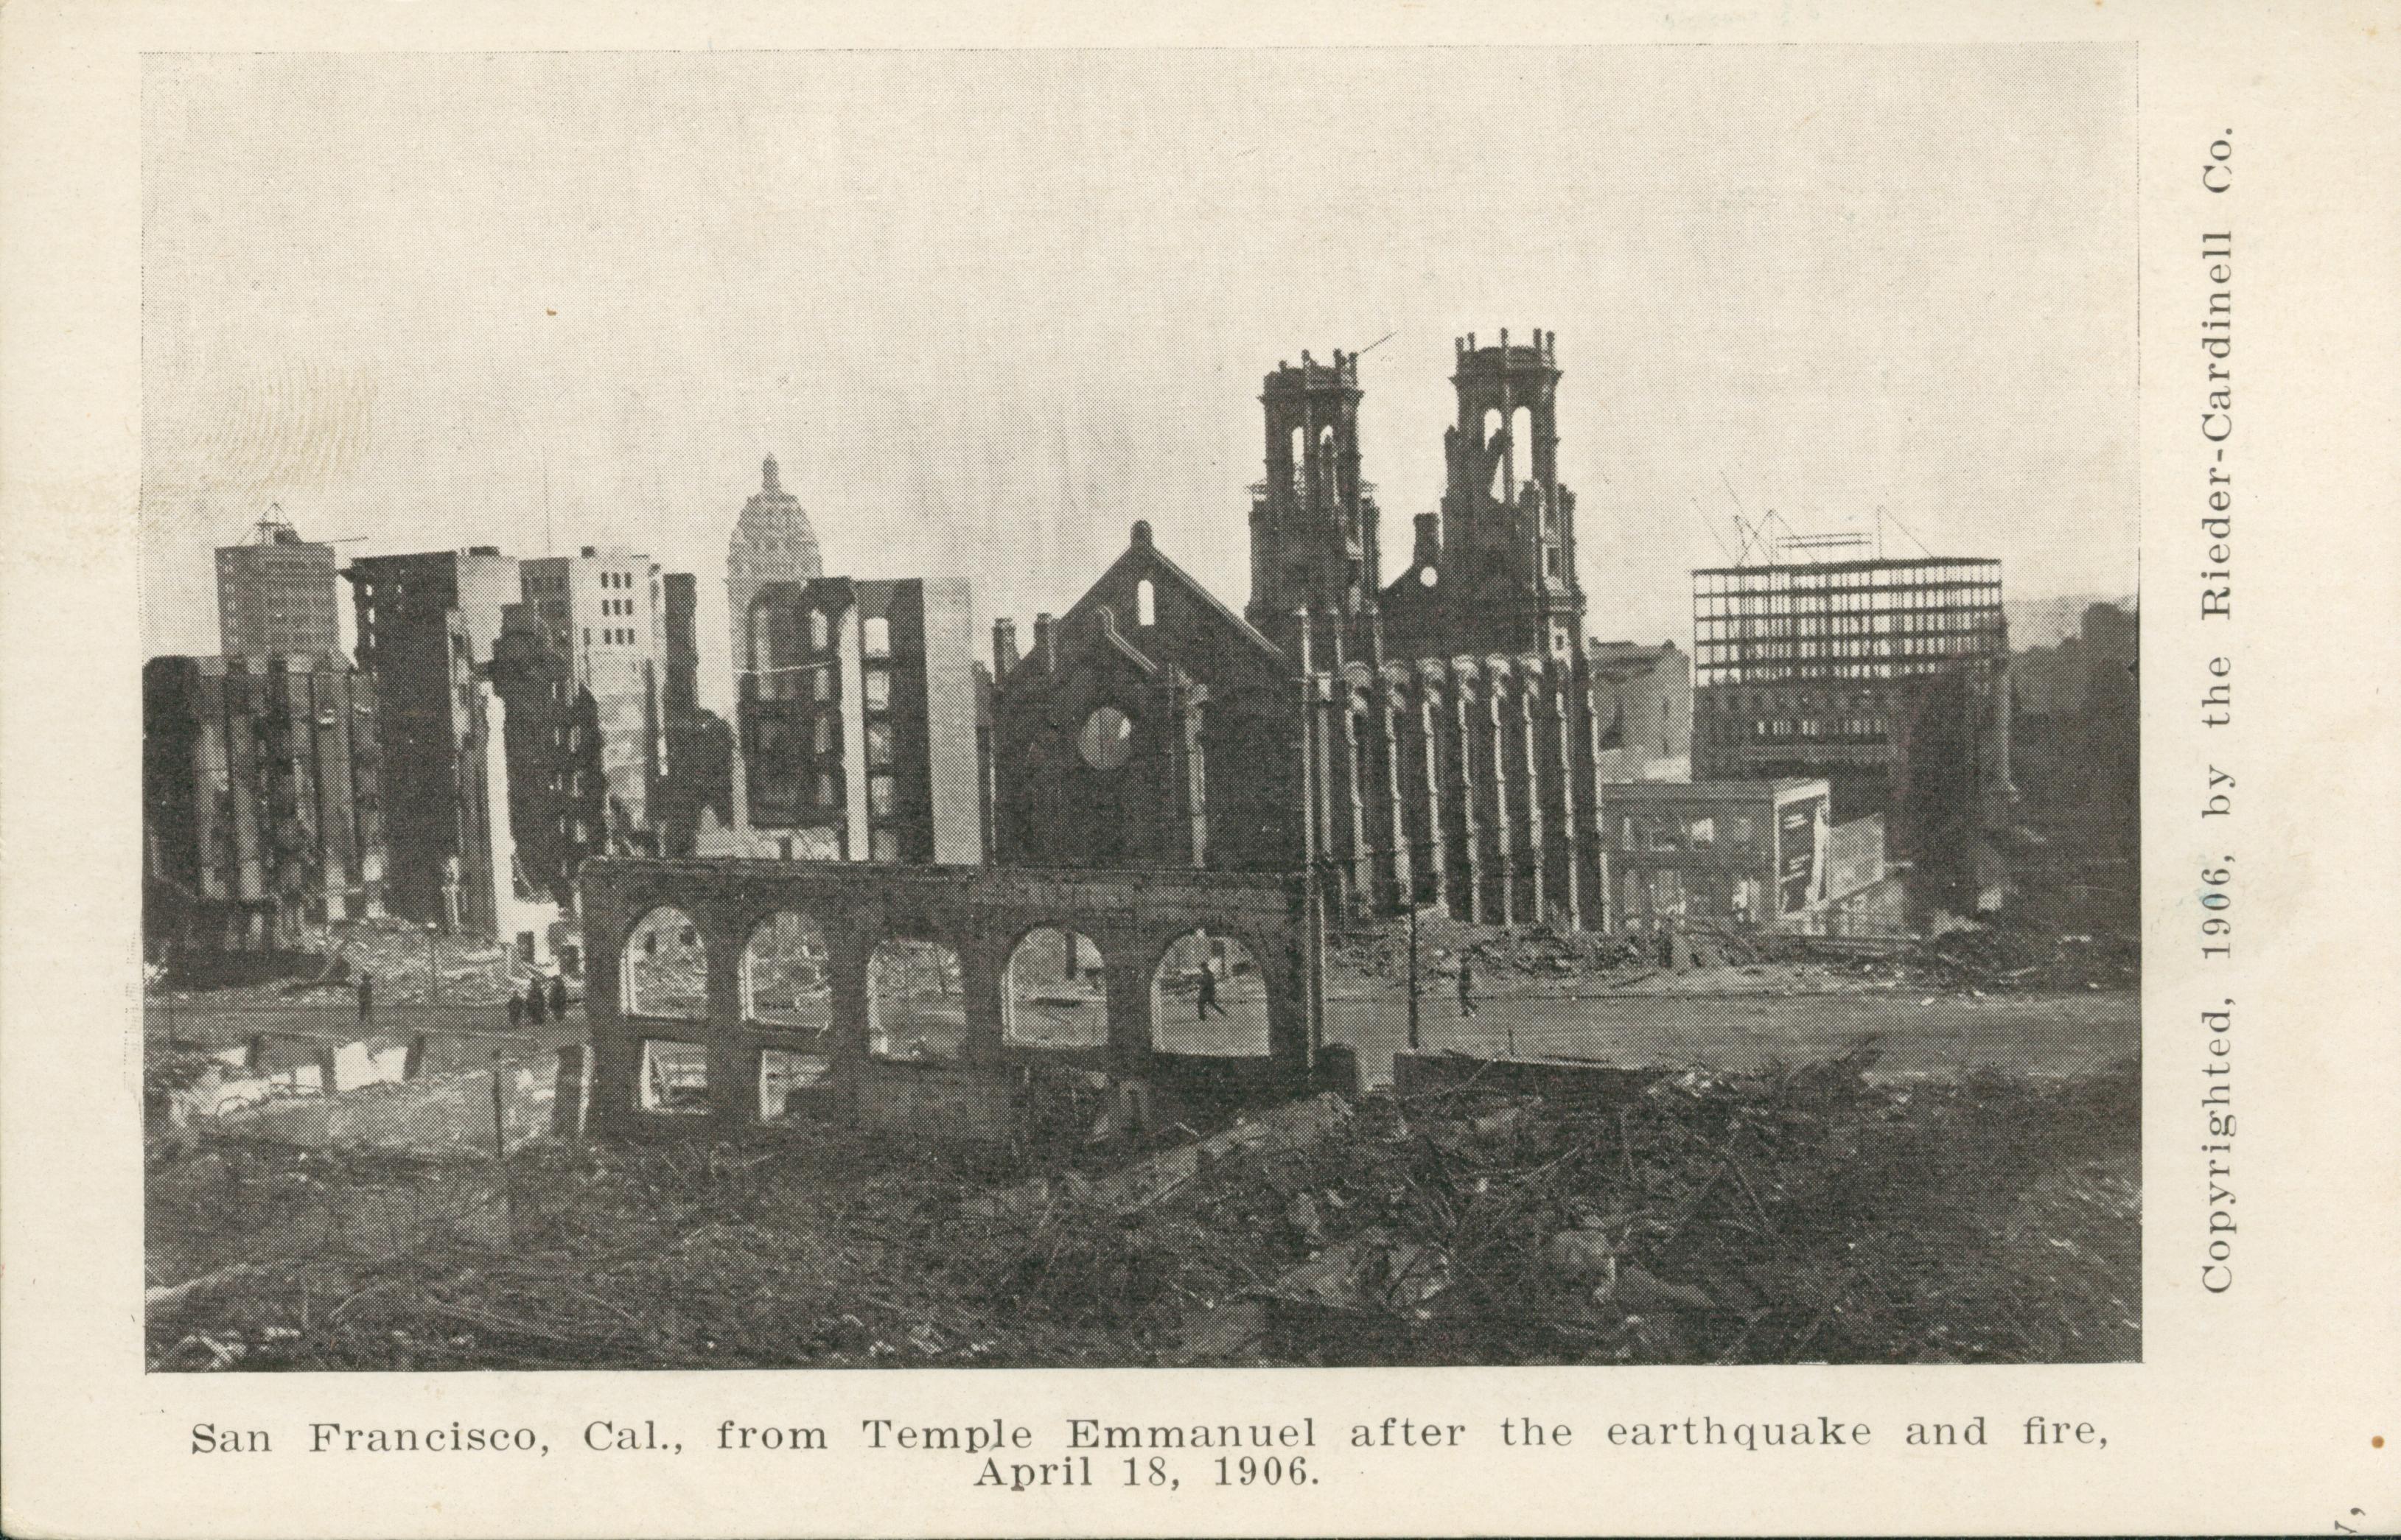 Shows the destruction of a  Temple in San Francisco.